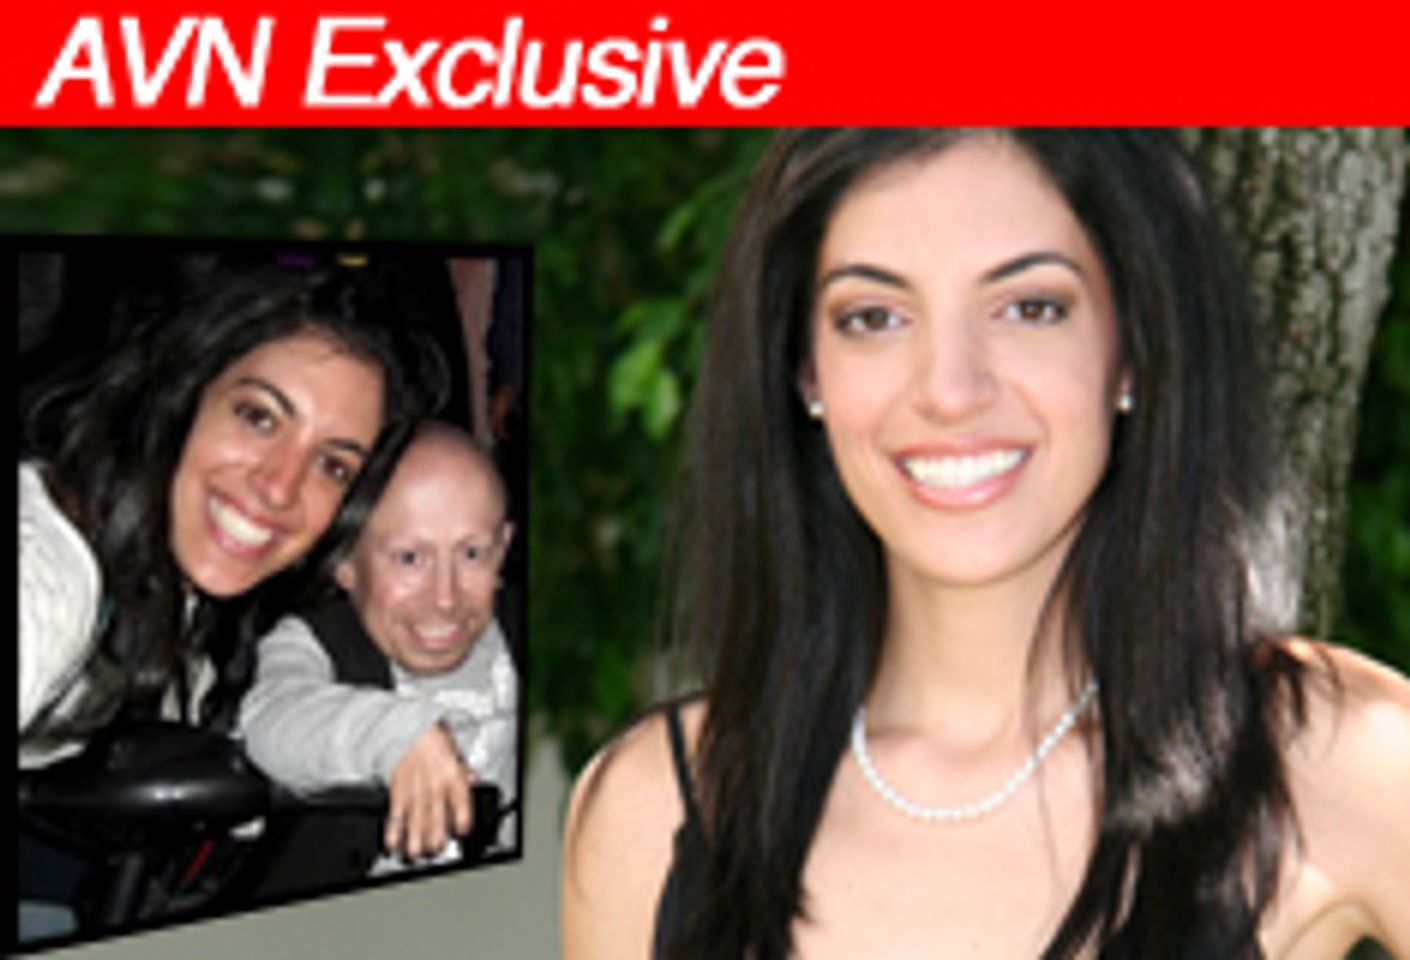 AVN Exclusive: Verne Troyer's Ex Discusses Sex Tape, Relationship, More